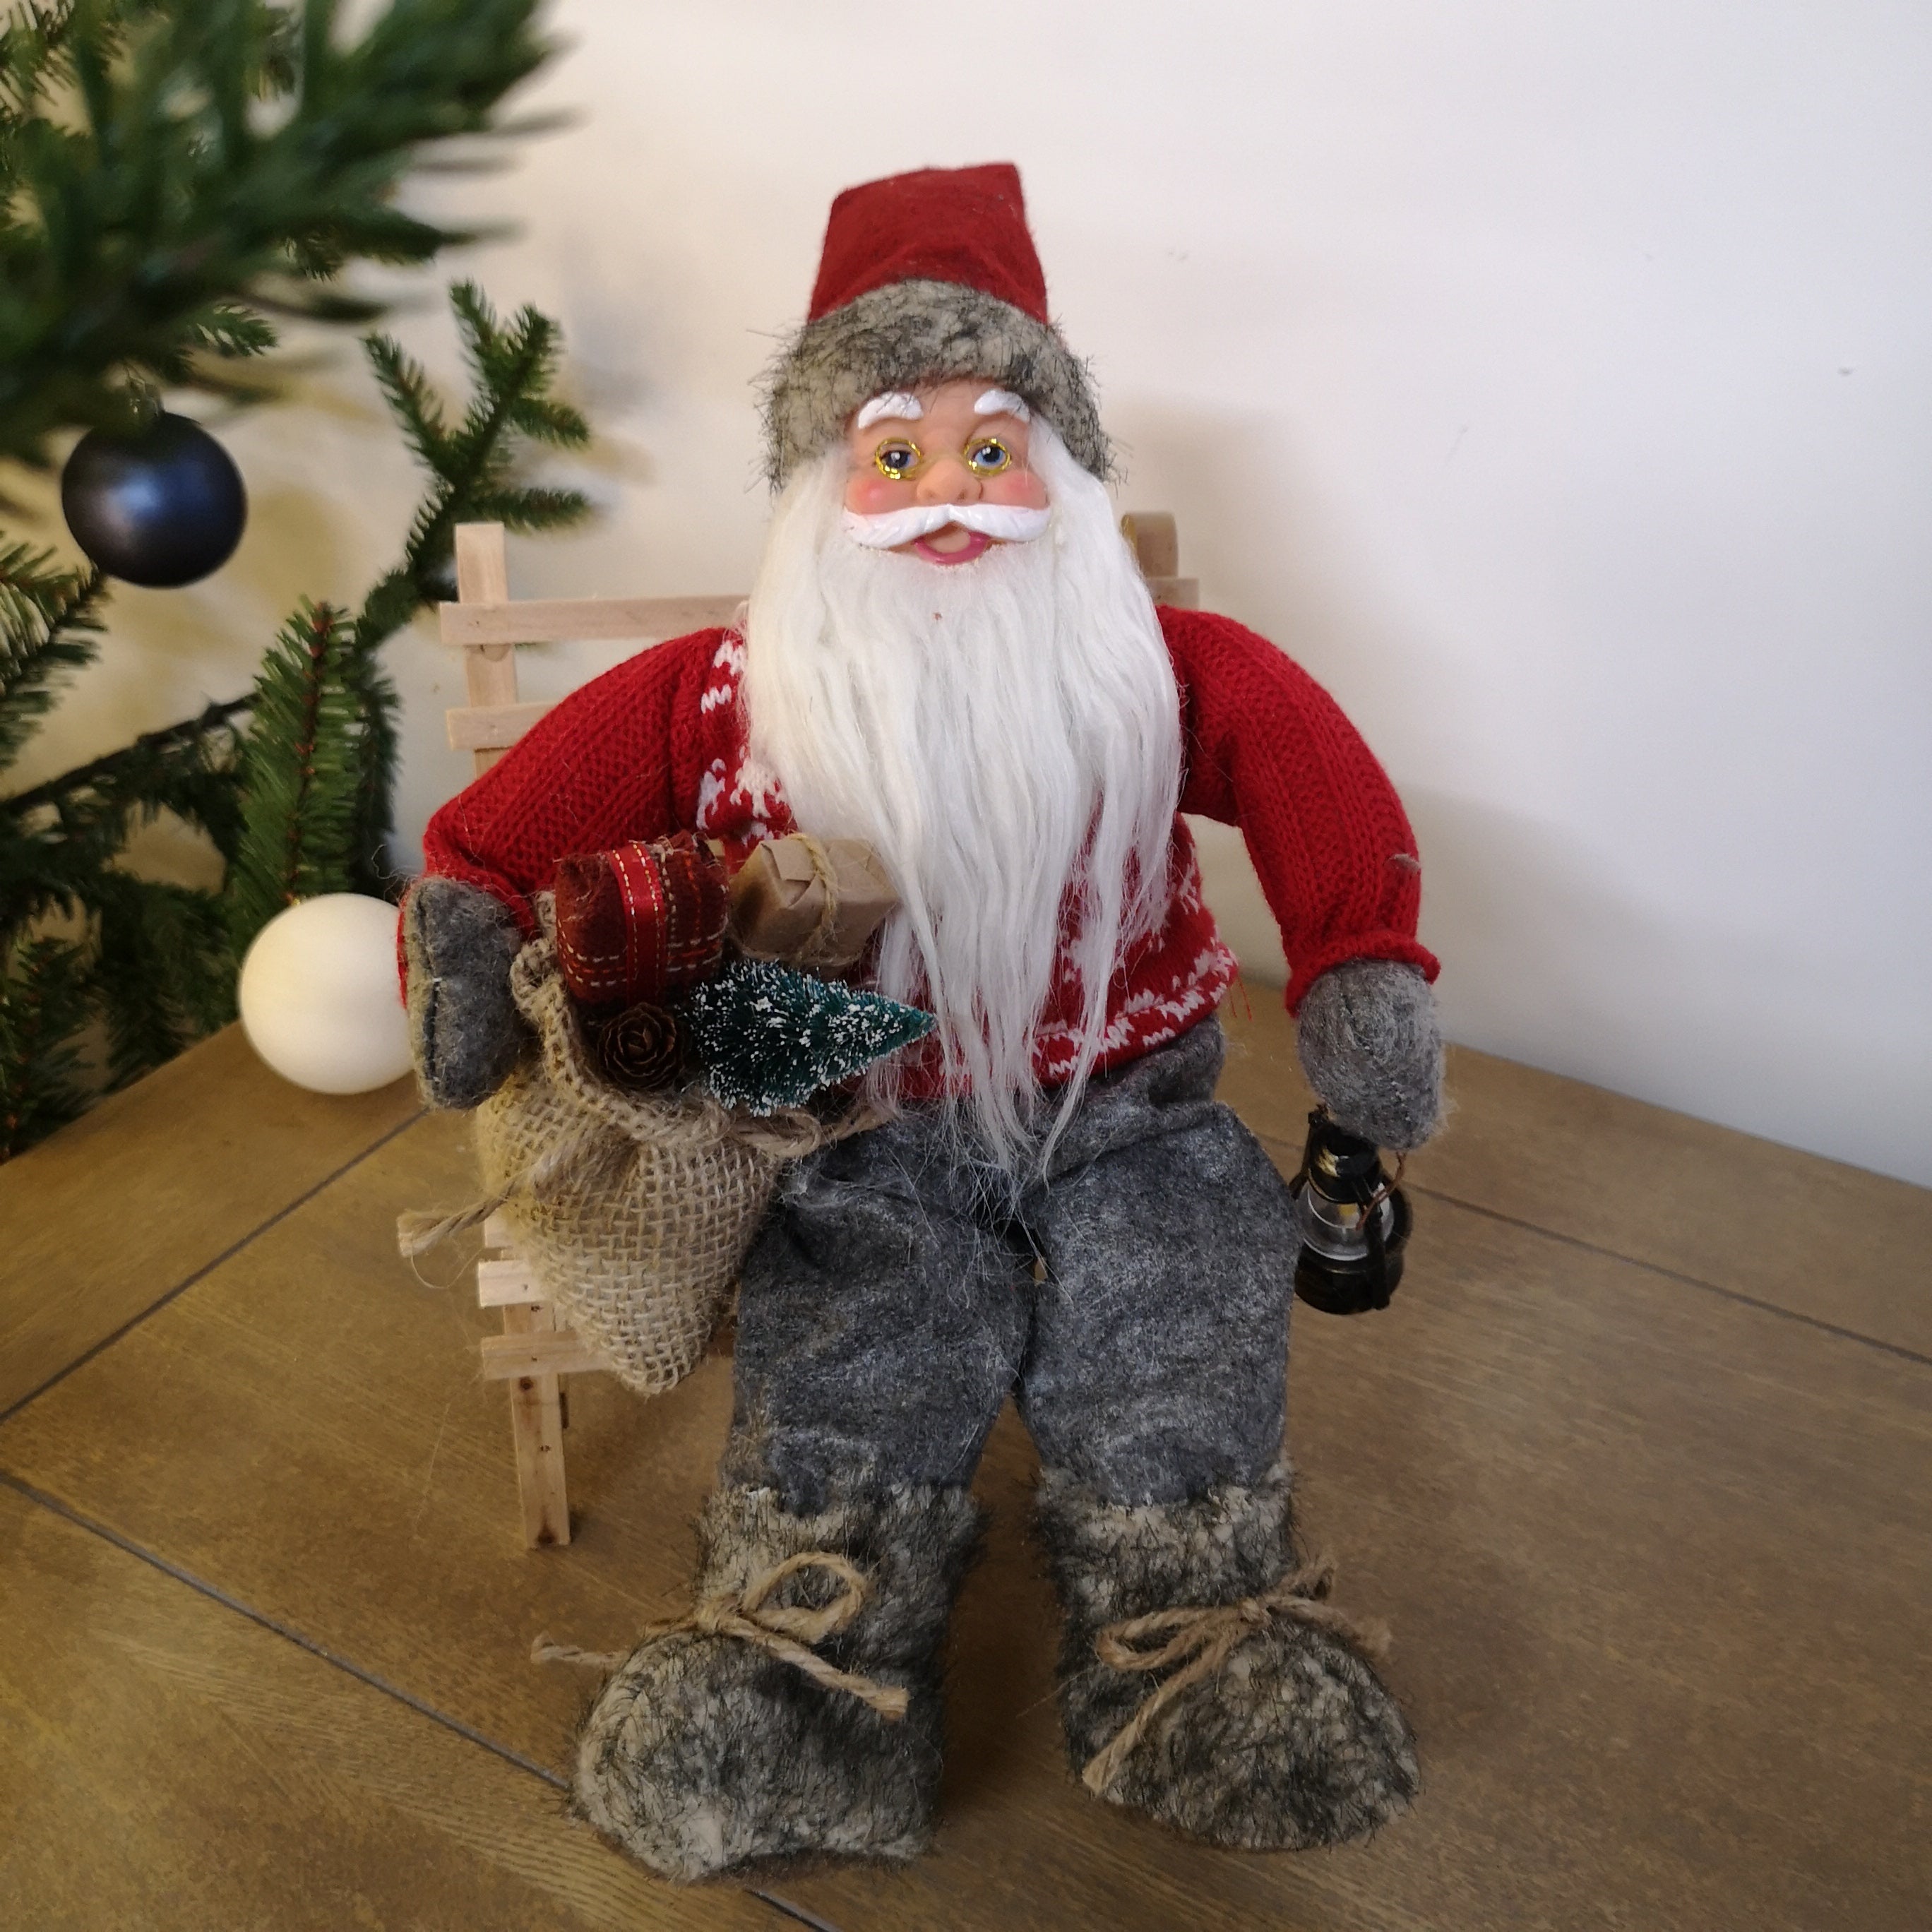 25cm Father Christmas Decoration Santa Claus Sitting on Bench